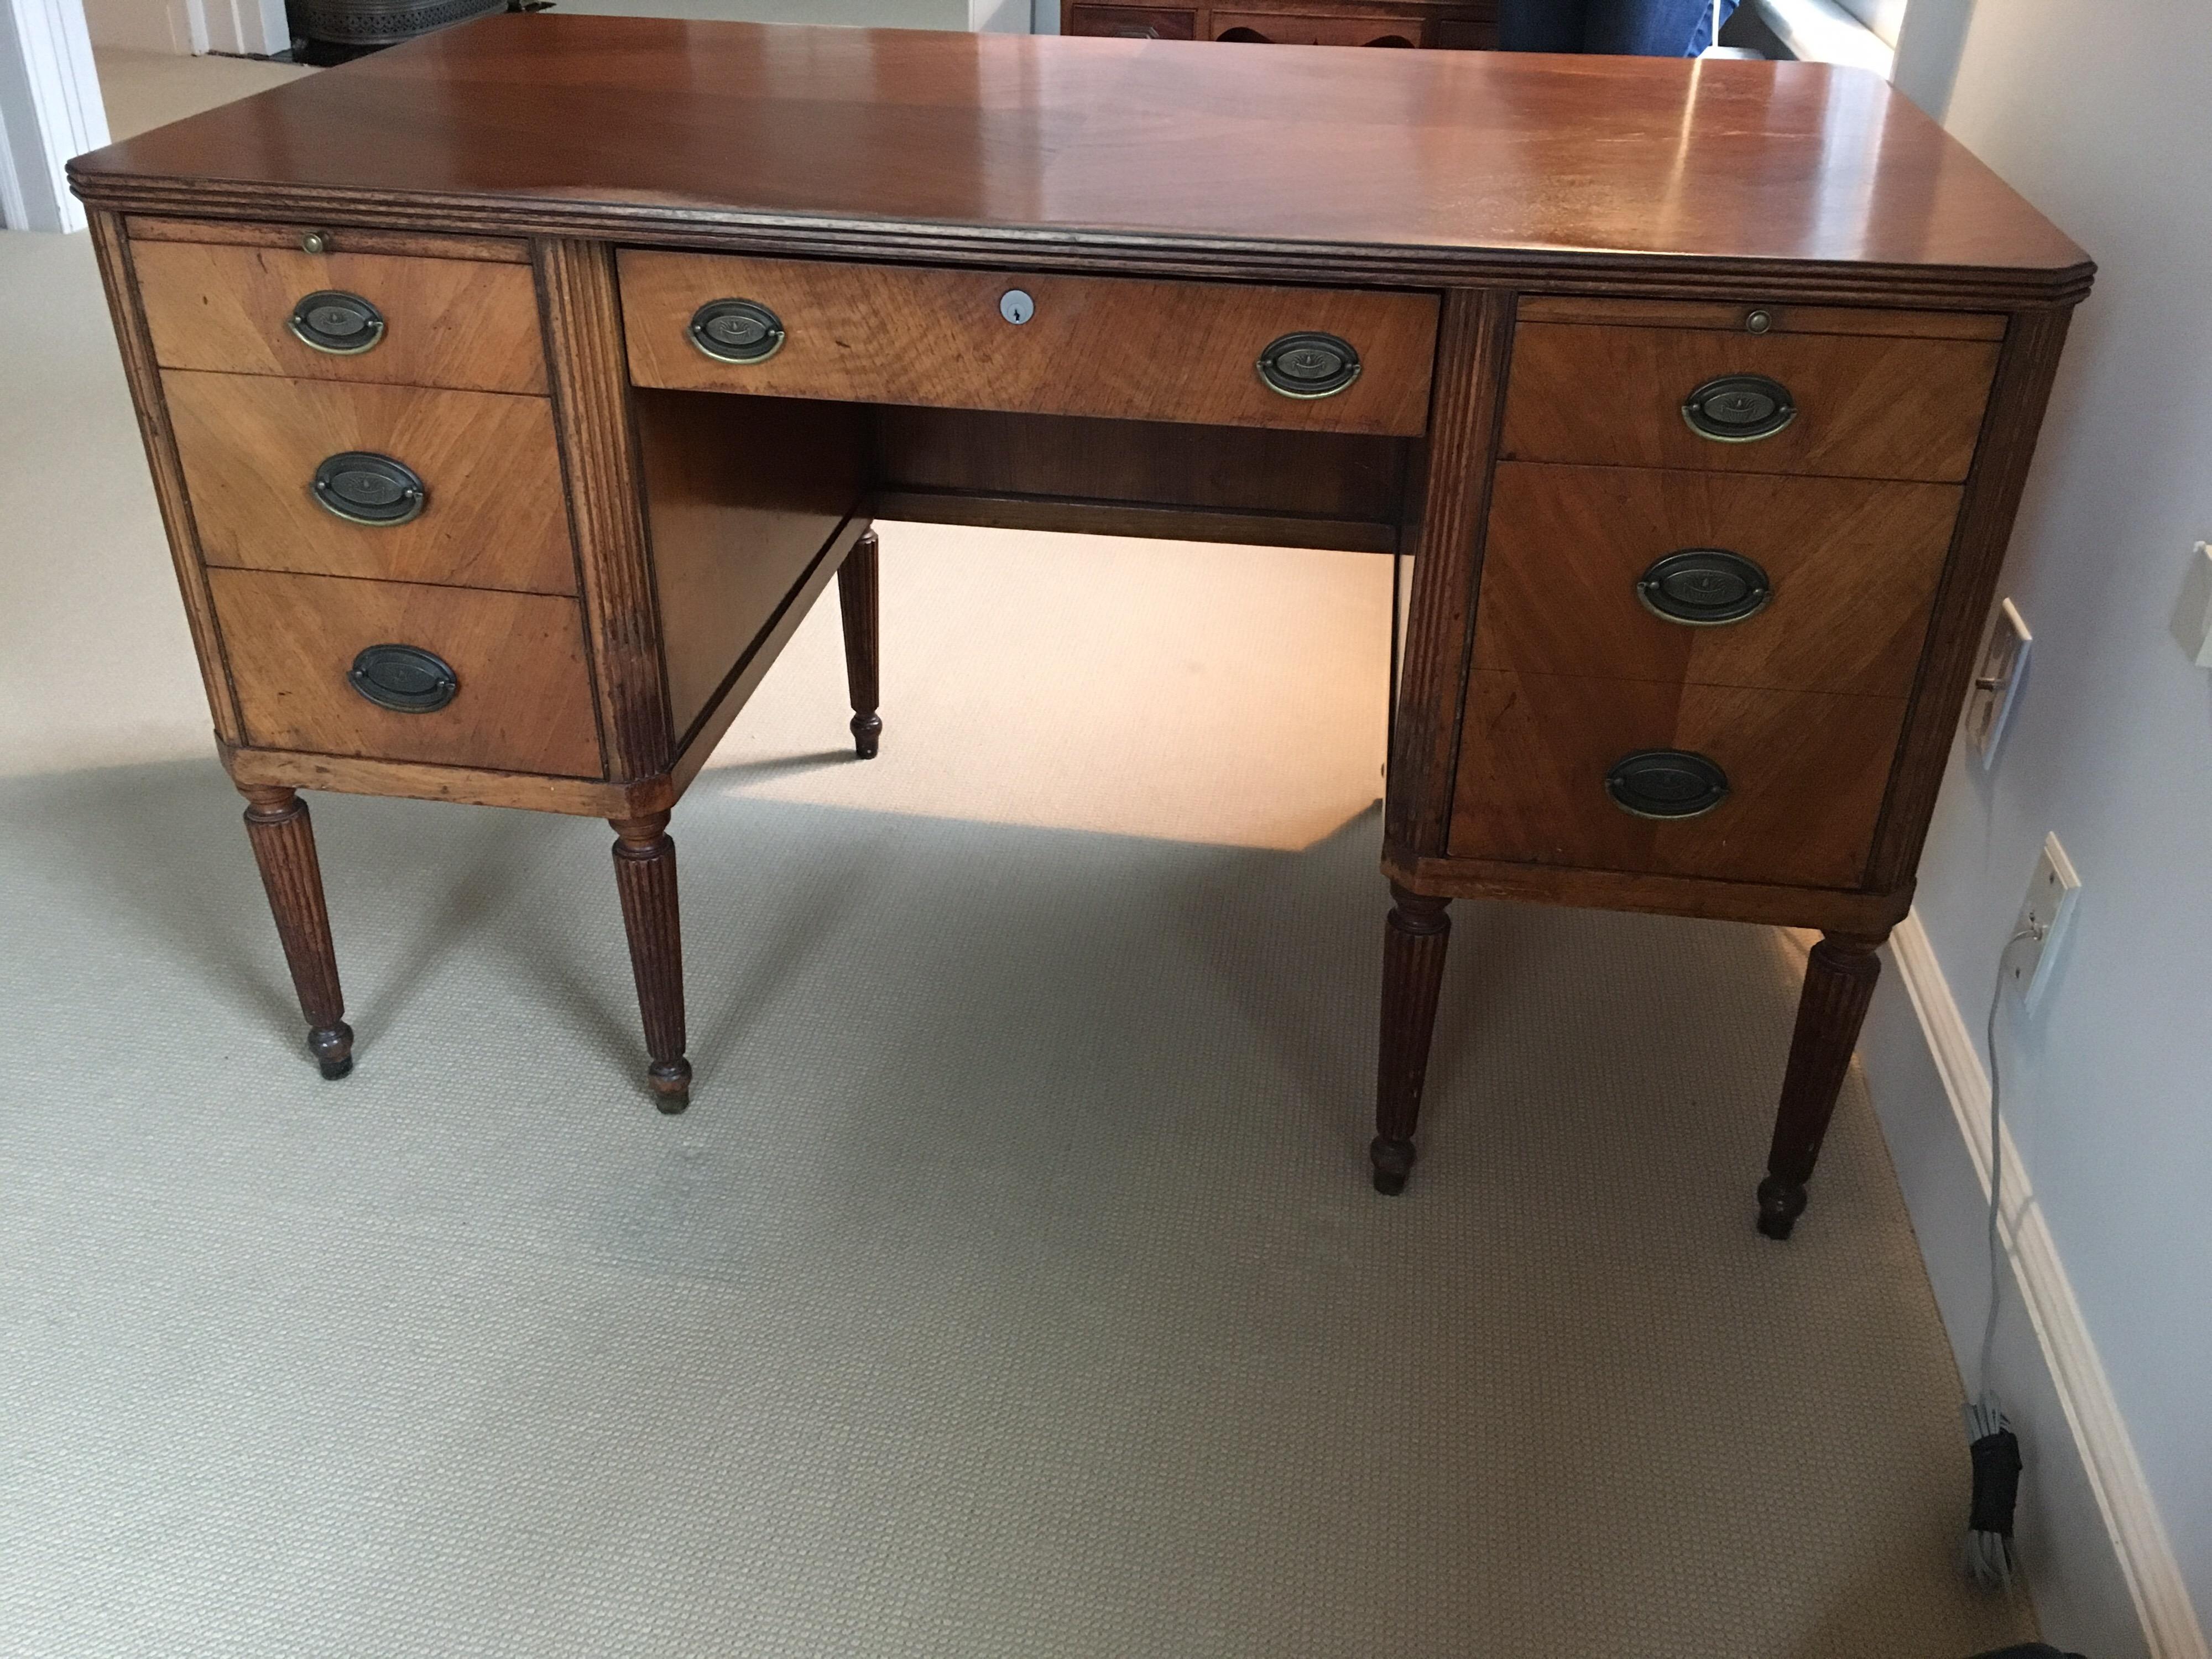 Ladies writing desk, circa 1920s
Three drawers on each side on a single drawer with lock. Two wood writing tops on either side of kneehole. Lovely wood matching on the top creating a diamond pattern. Book matching on the front and back panels. Wear